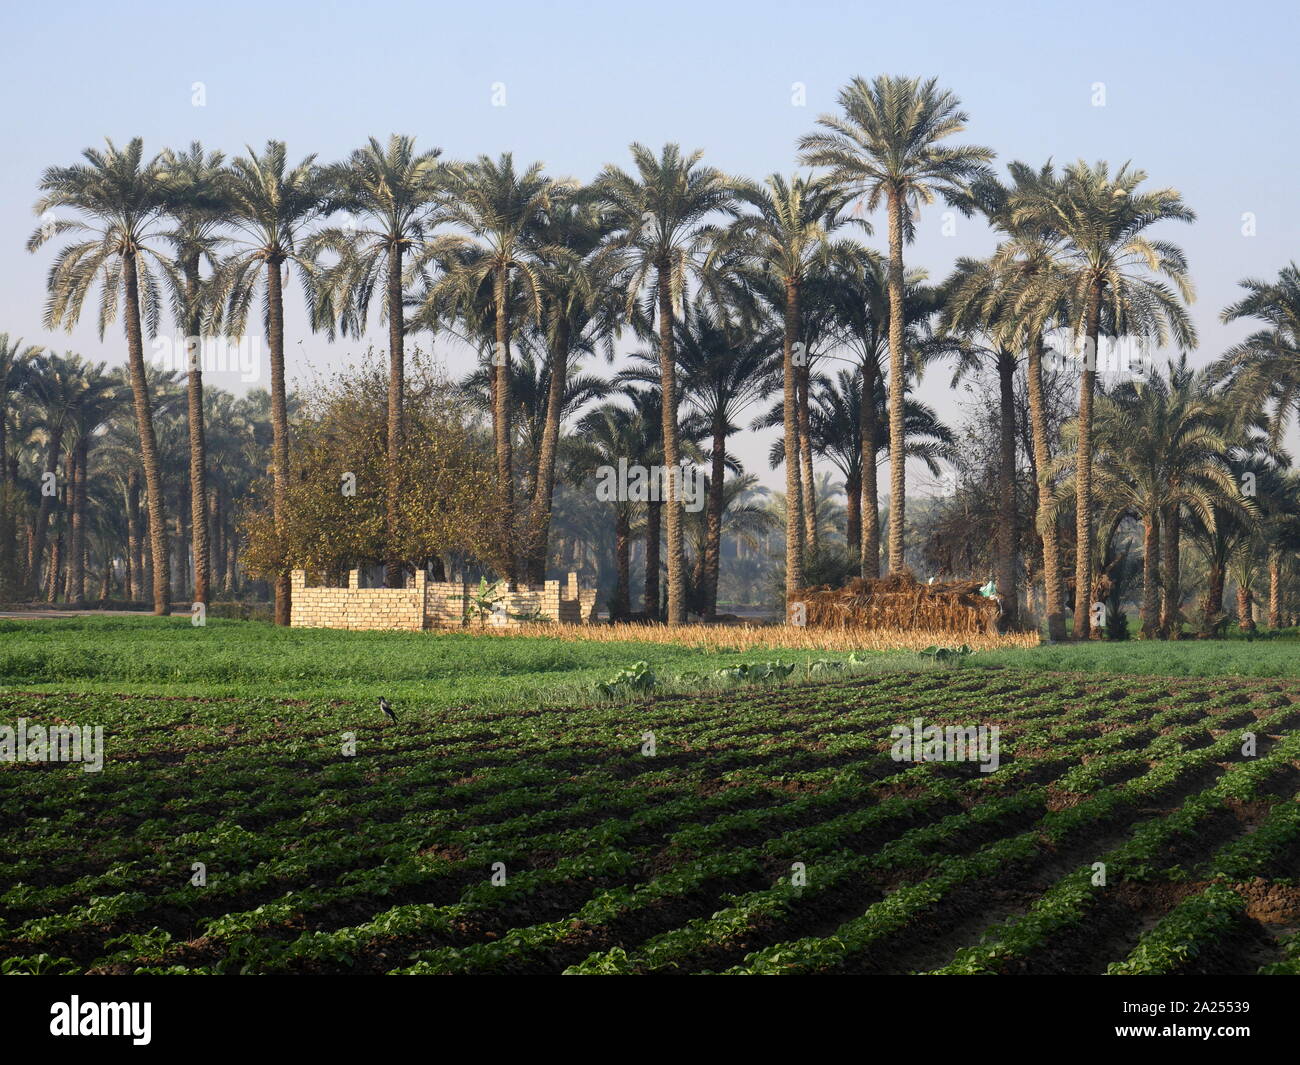 Fertile vegetation along the River Nile in Egypt. commonly regarded as the longest river in the world,  the Nile, which is 6,853 km (4,258 miles) long, Stock Photo